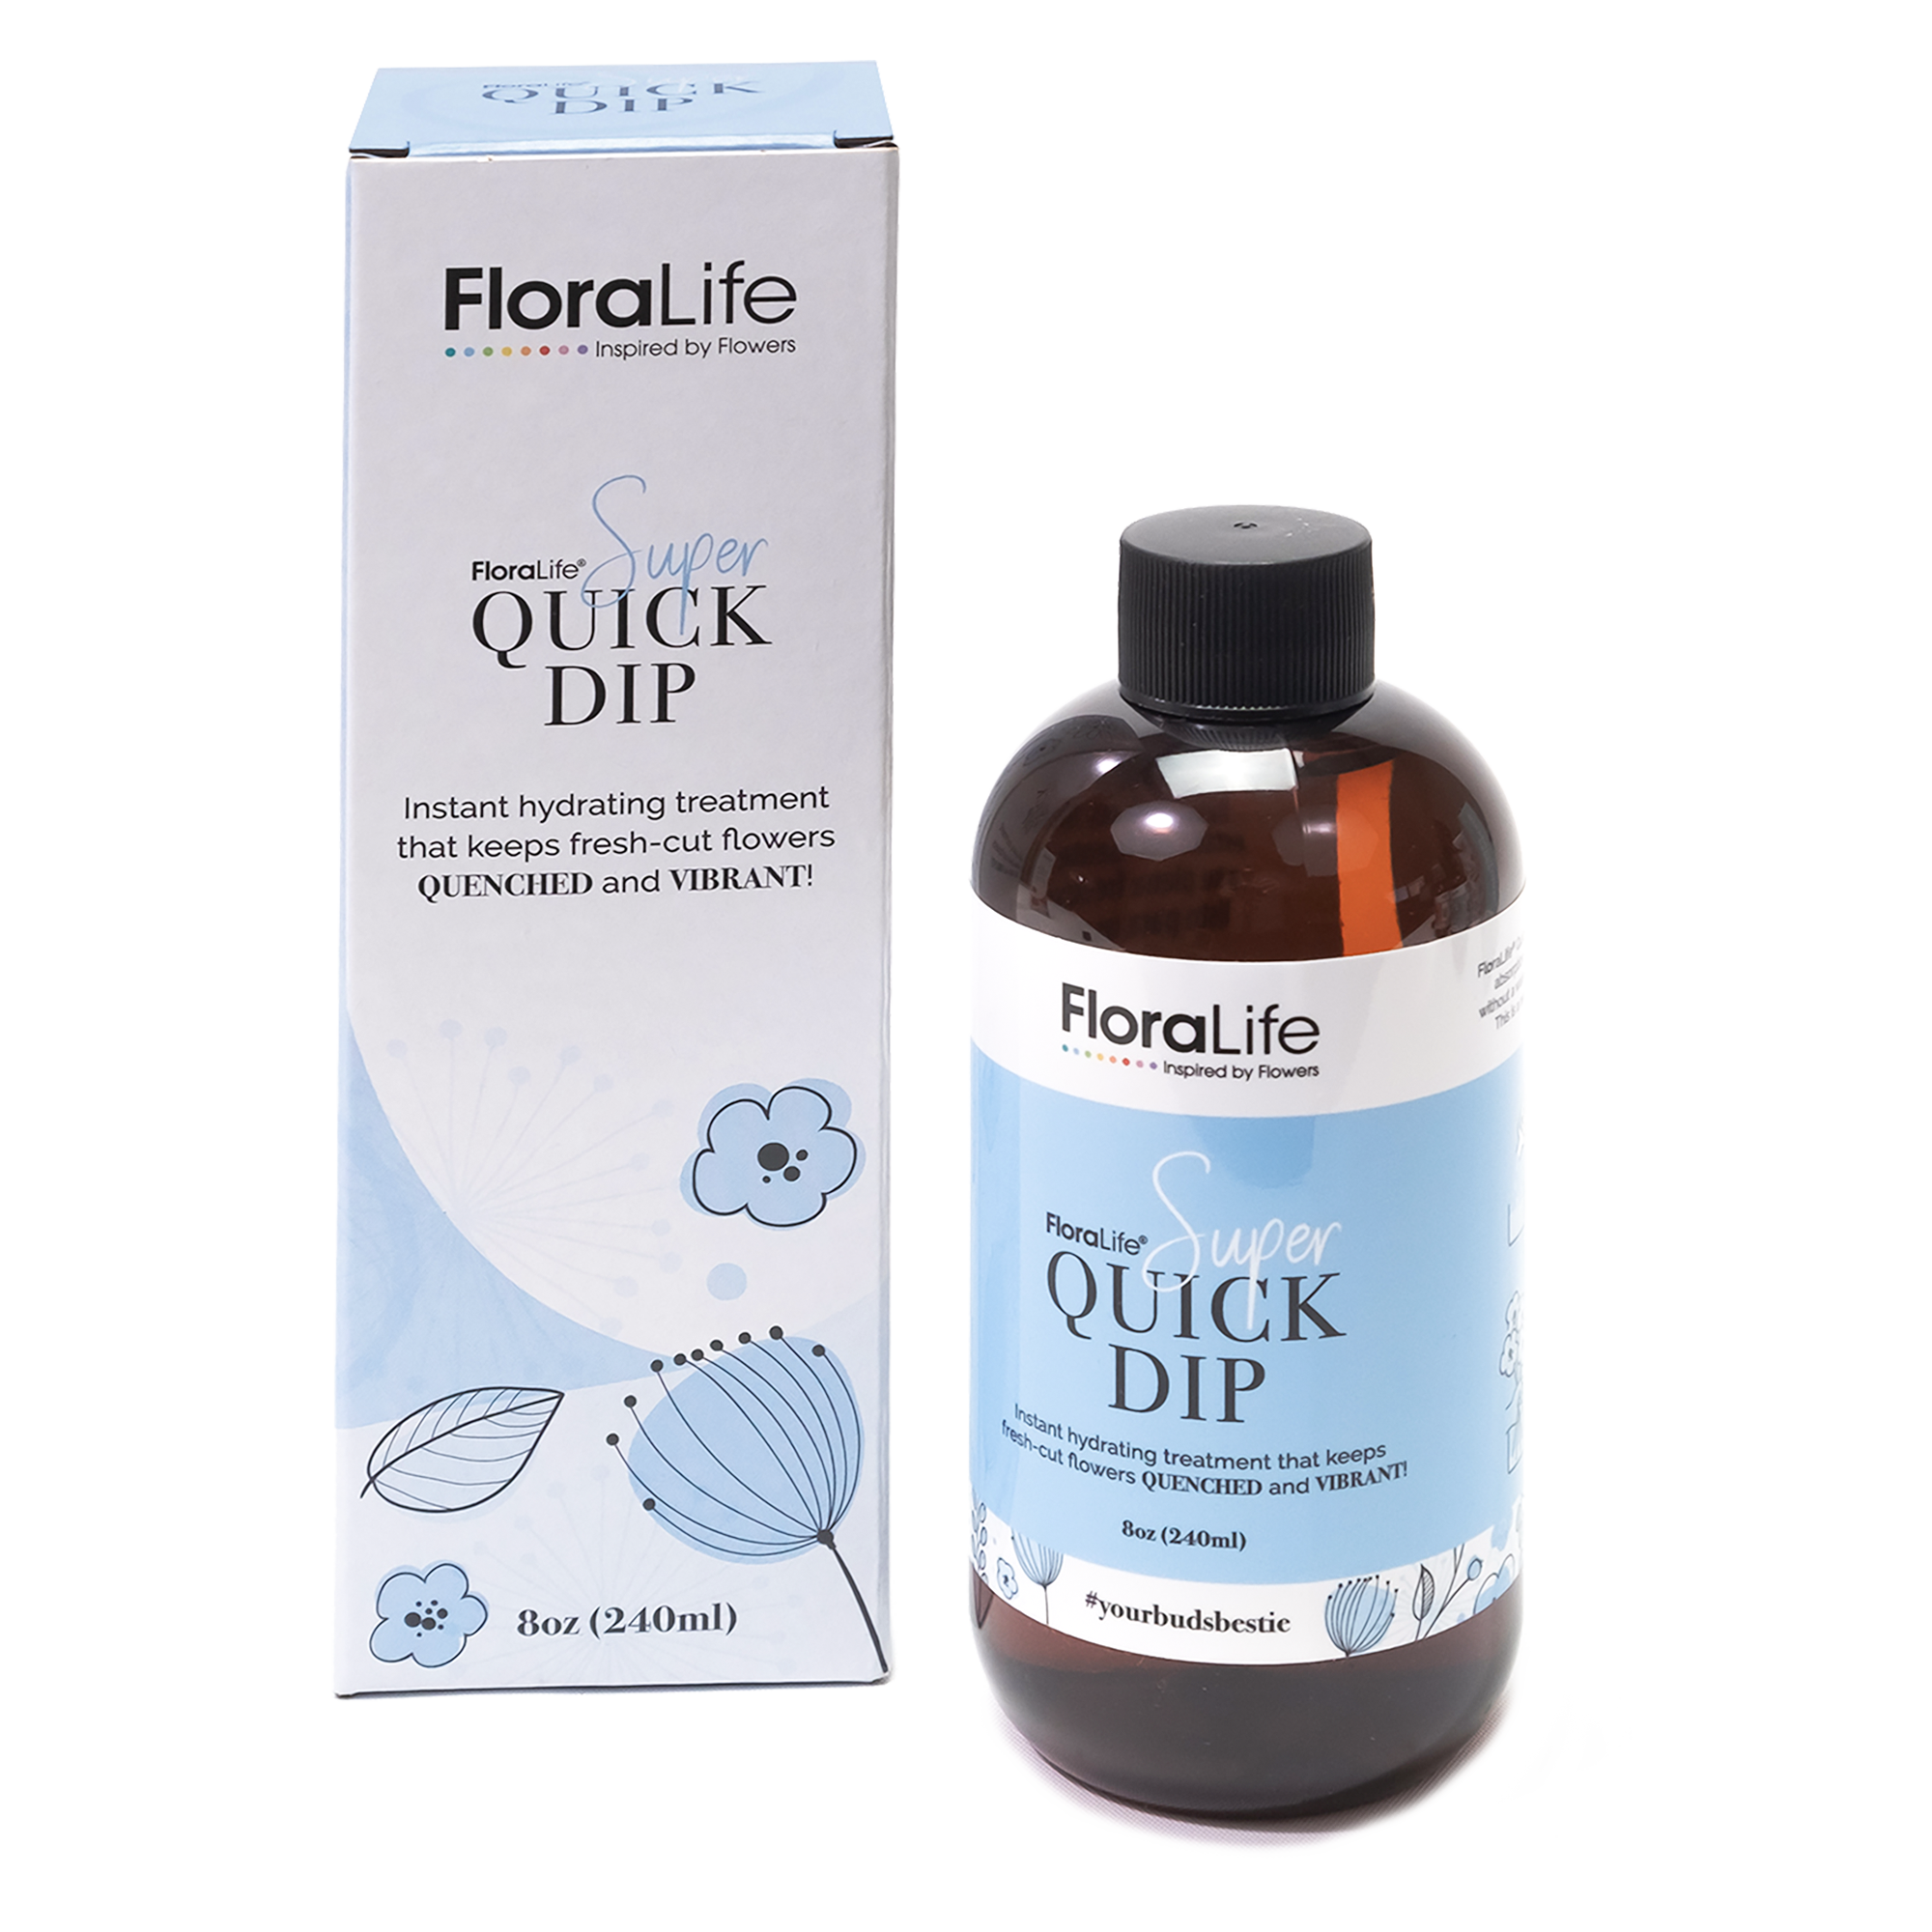  FloraLife Quick Dip, Finishing Touch Spray & Flower